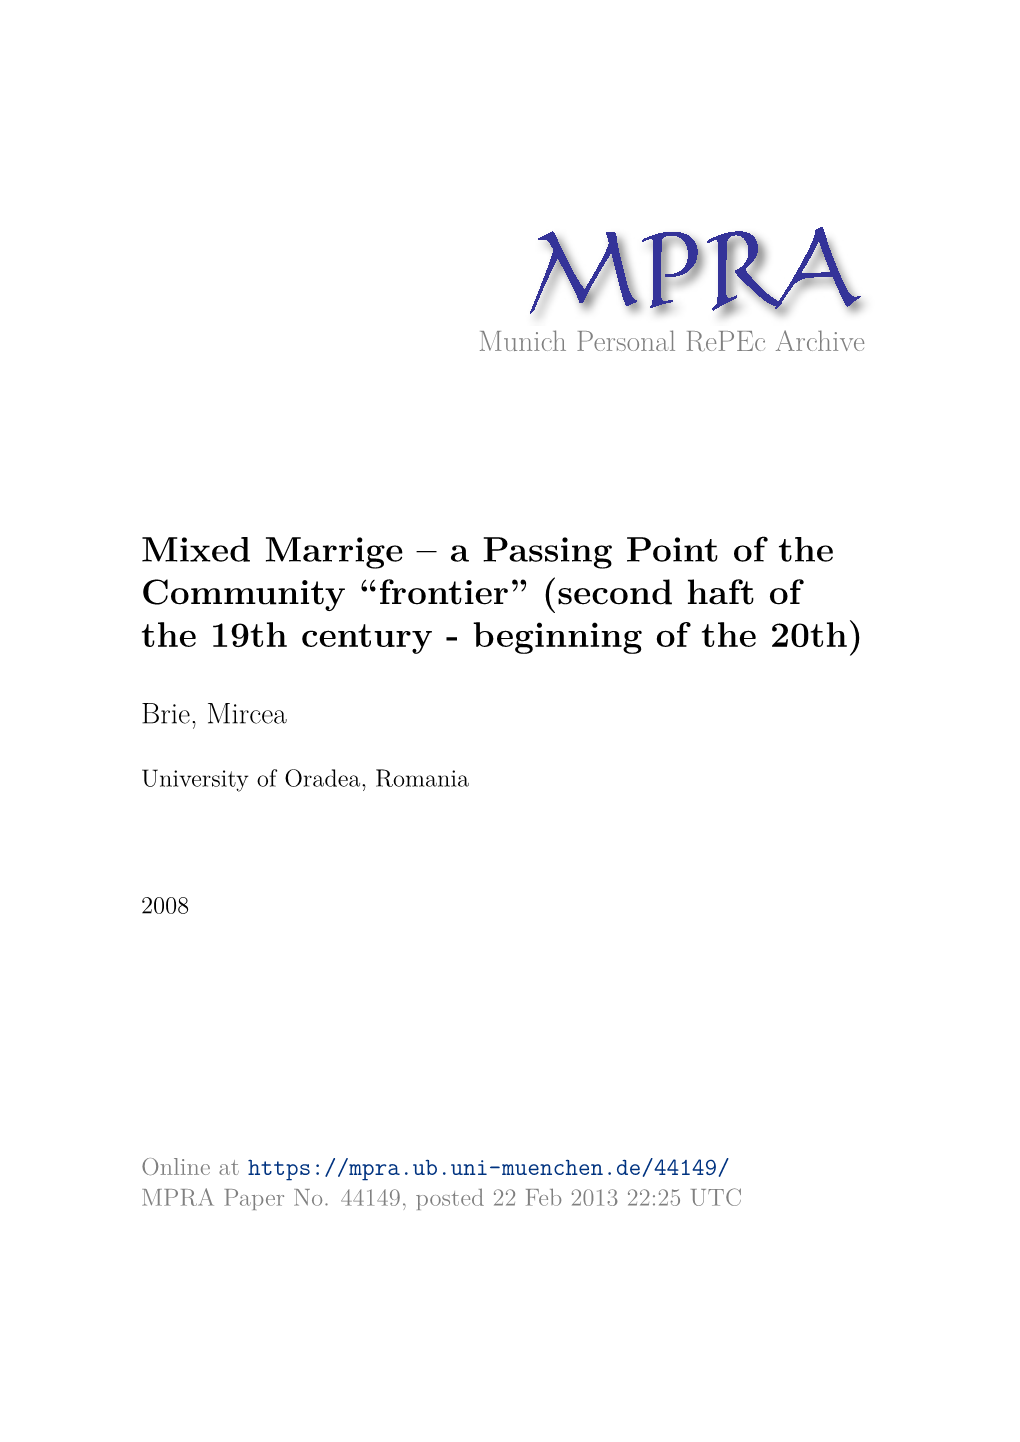 Mixed Marrige – a Passing Point of the Community “Frontier” (Second Haft of the 19Th Century - Beginning of the 20Th)